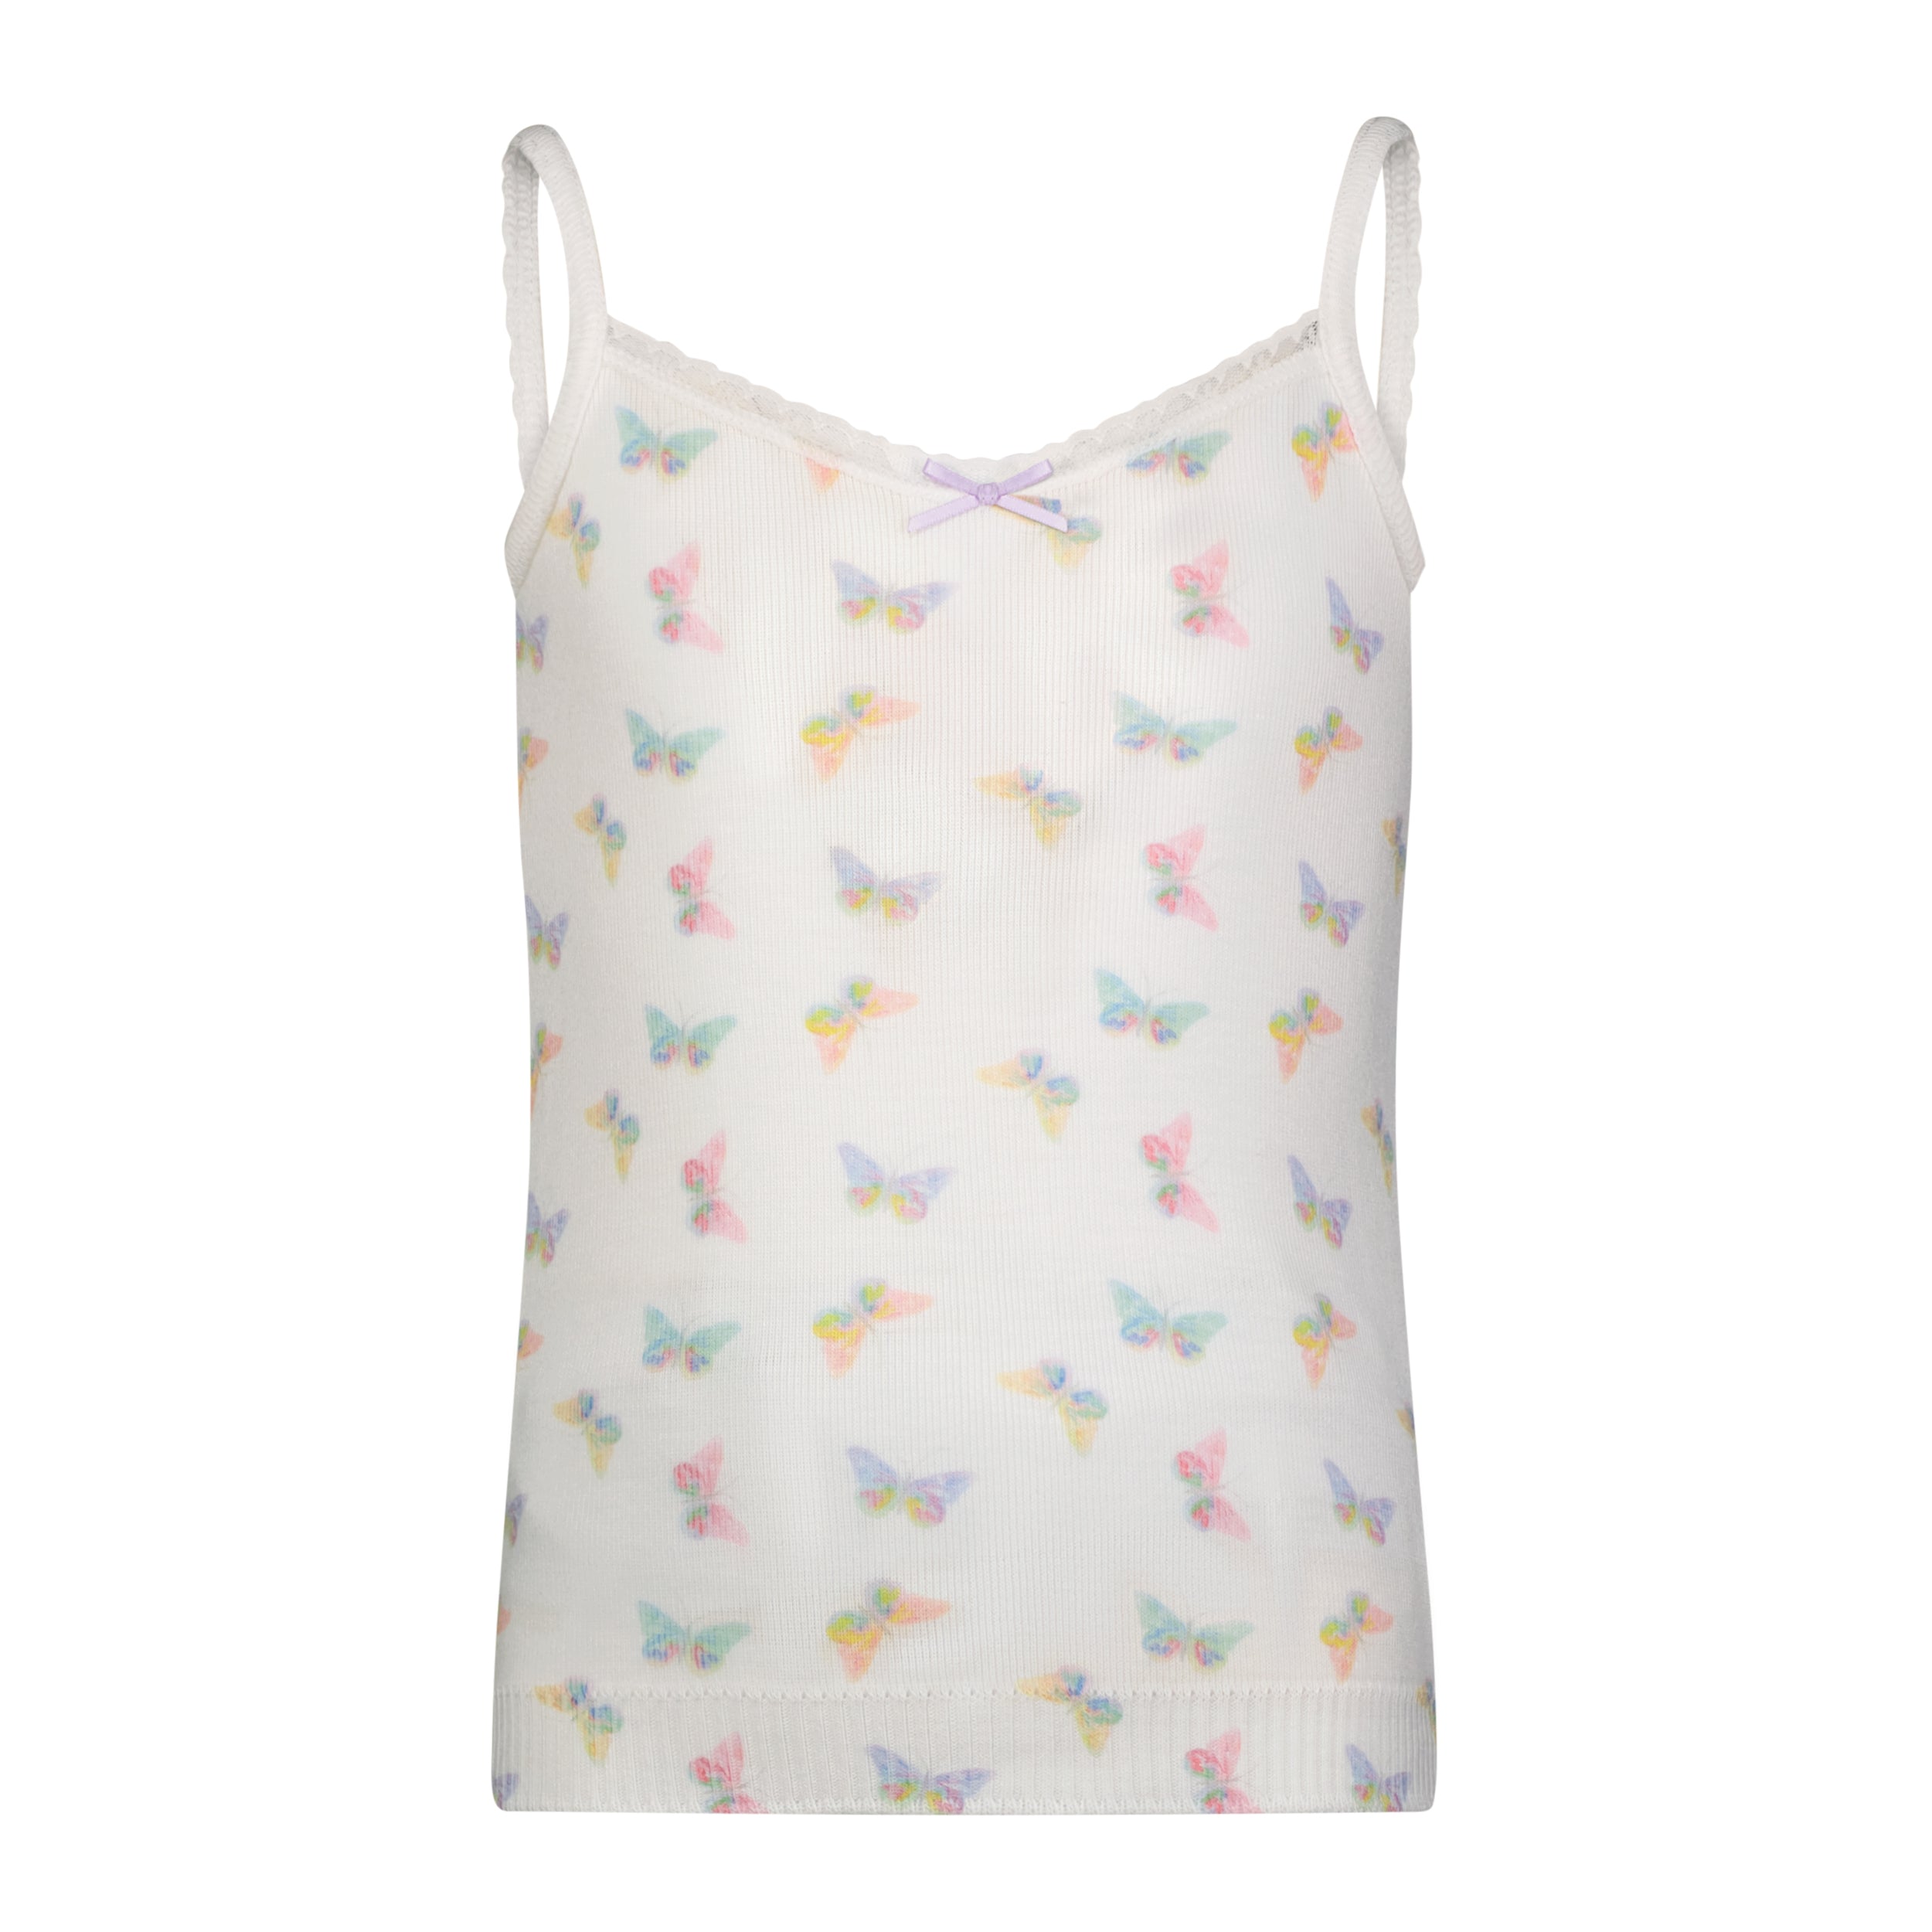 GIRLS BUTTERFLY Print CAMISOLE w Lace